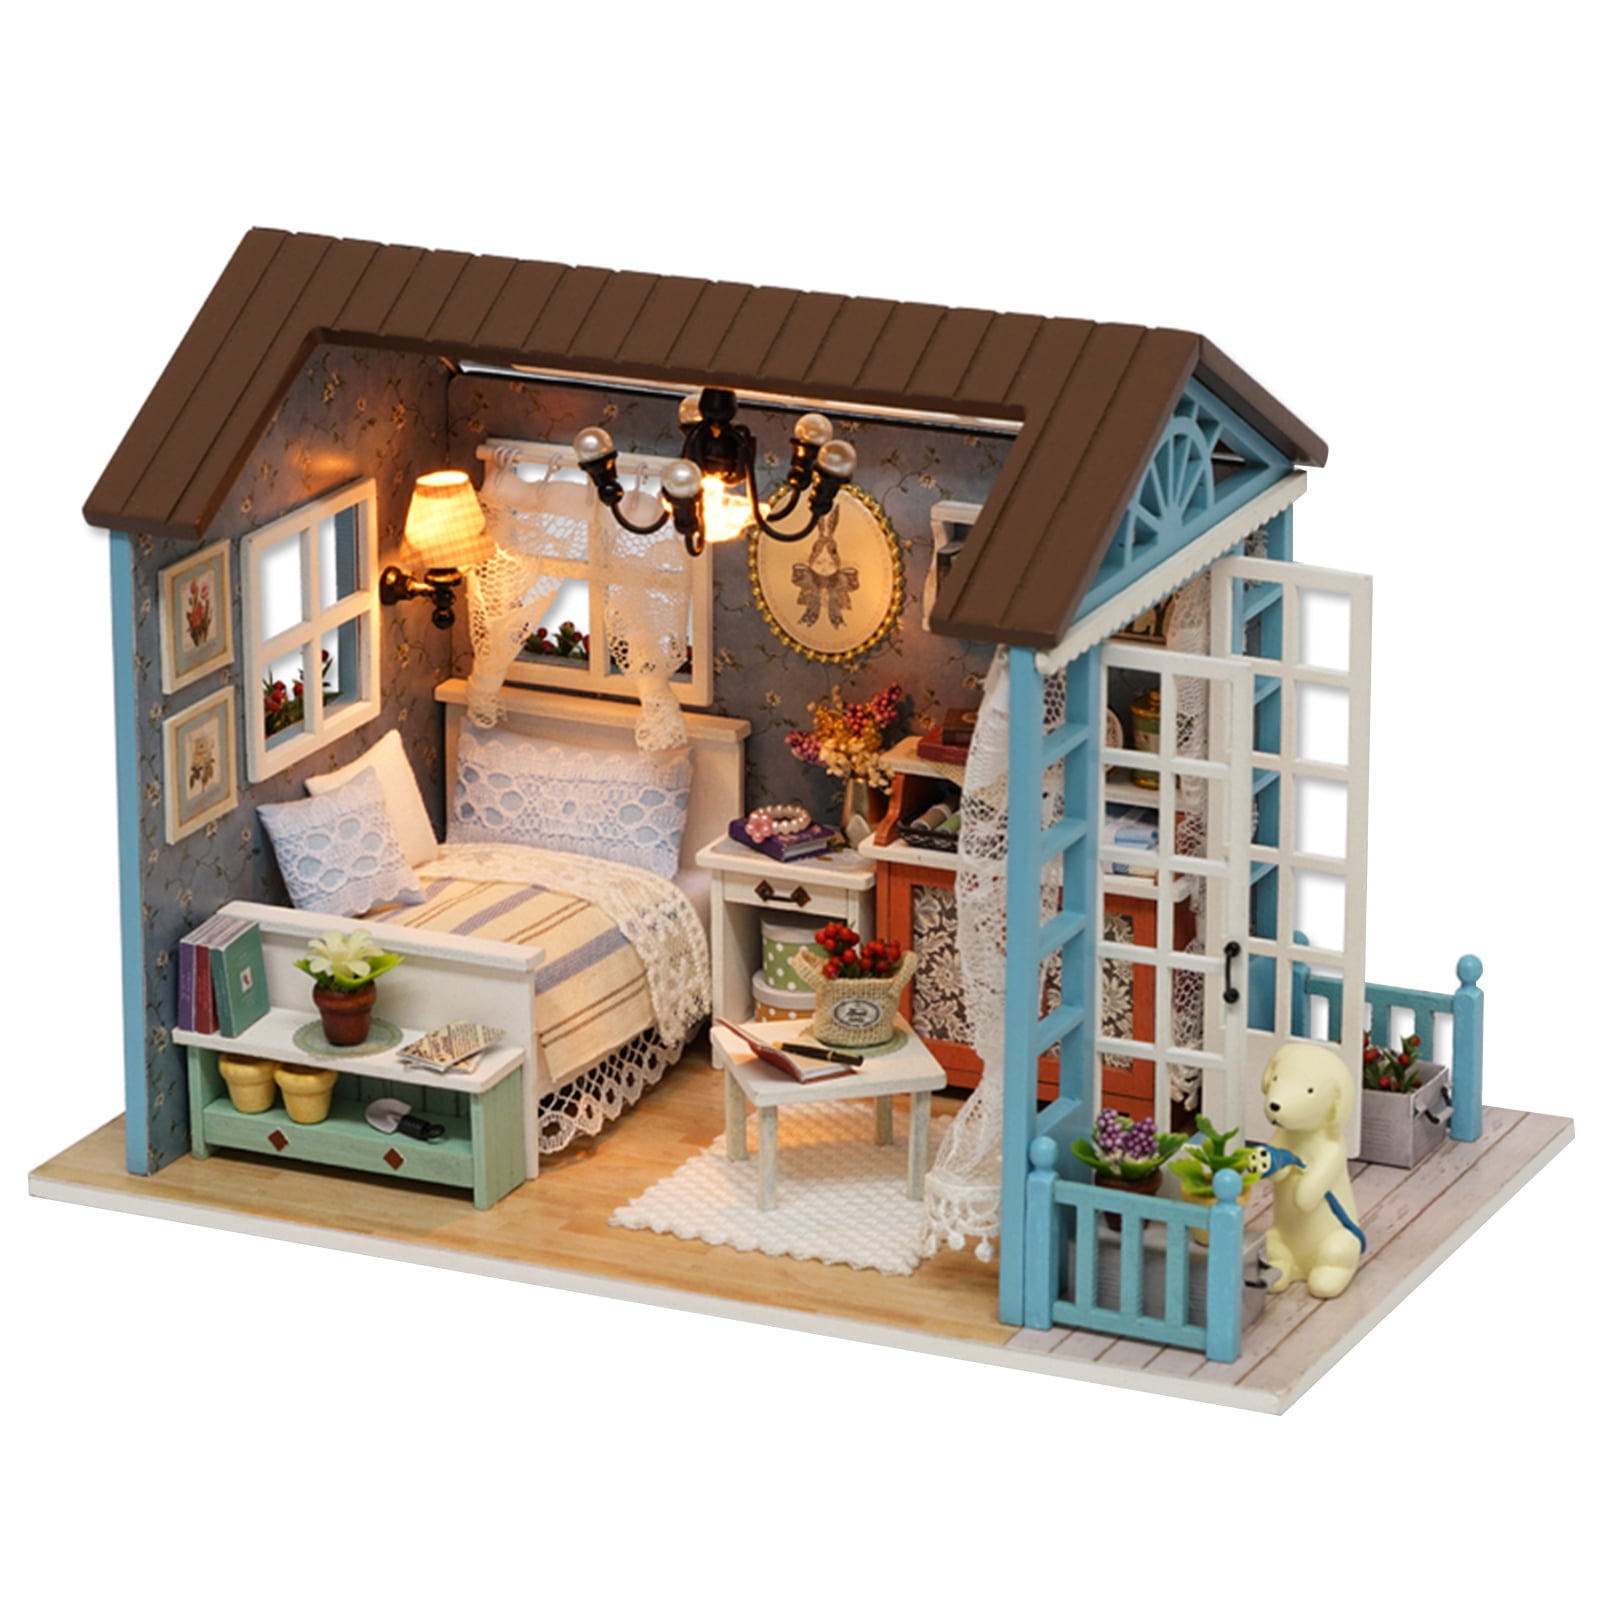 Vibola DIY Dollhouse Kit,Exquisite House Miniature Dollhouse Kits with Lights,Creative 3D Puzzle Handmade Furniture Craft Kits for Boyfriend Girlfriend Birthday Gifts 